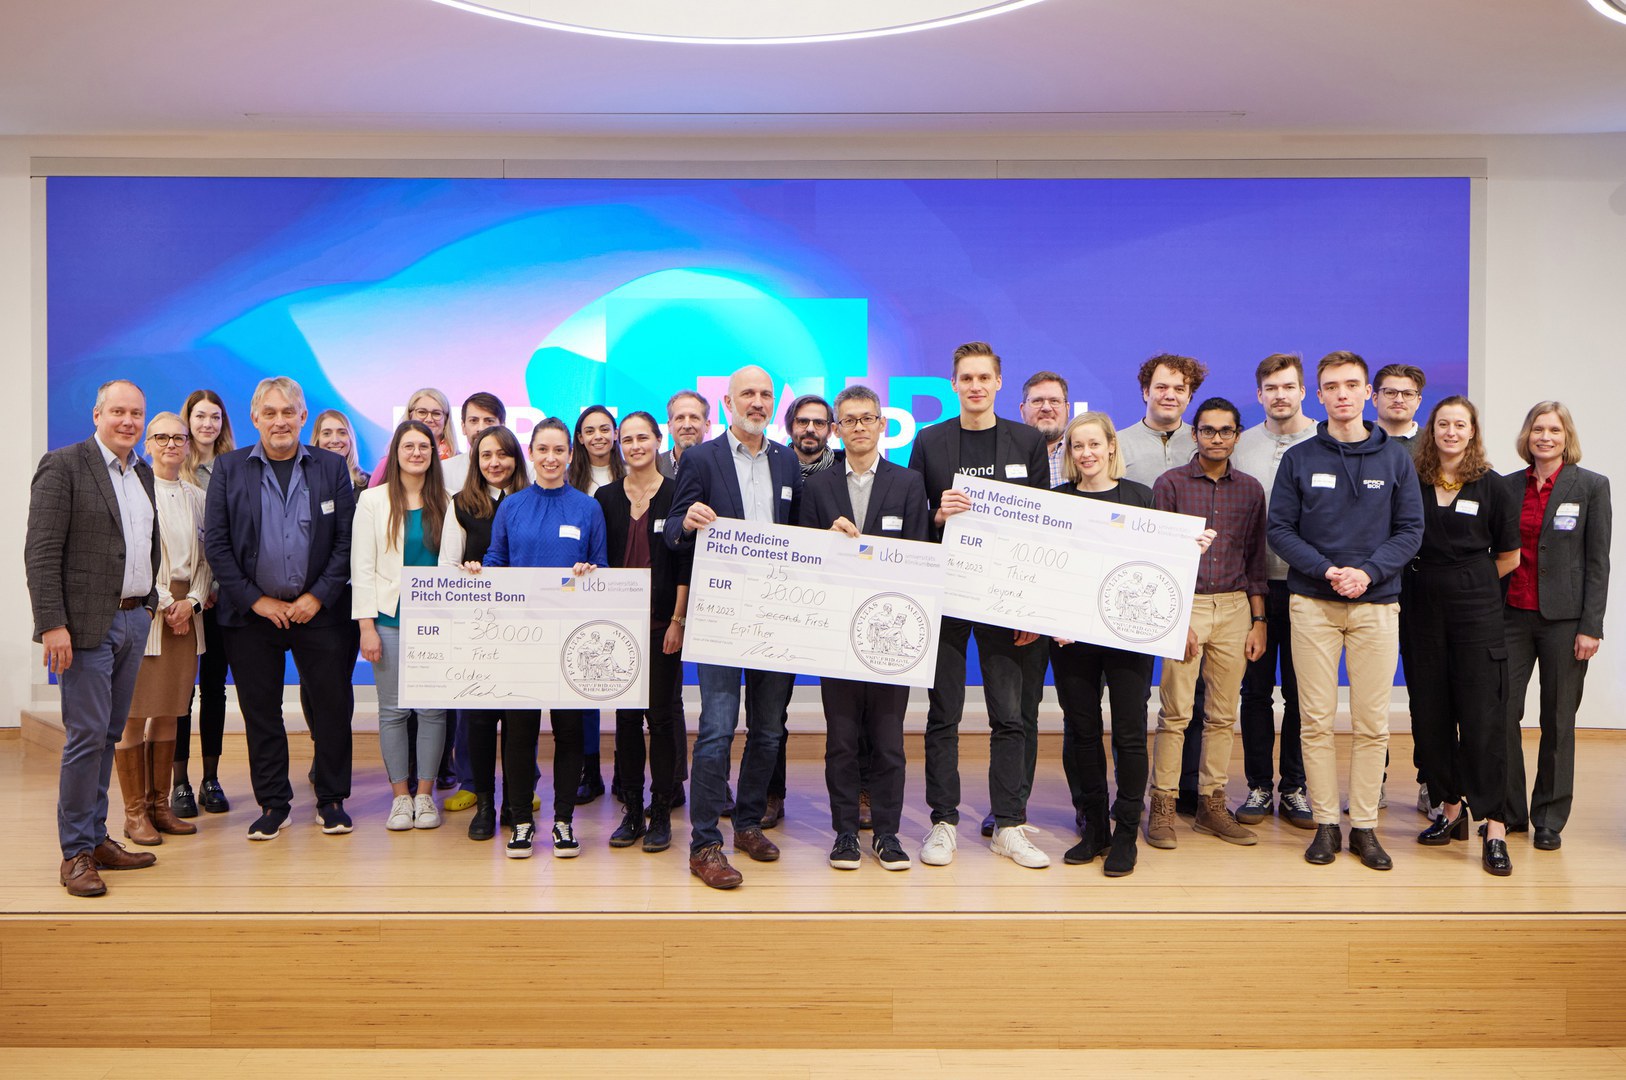 Participating and winning teams of the Medical Pitch Contest 2023 of the Medical Faculty of the University of Bonn